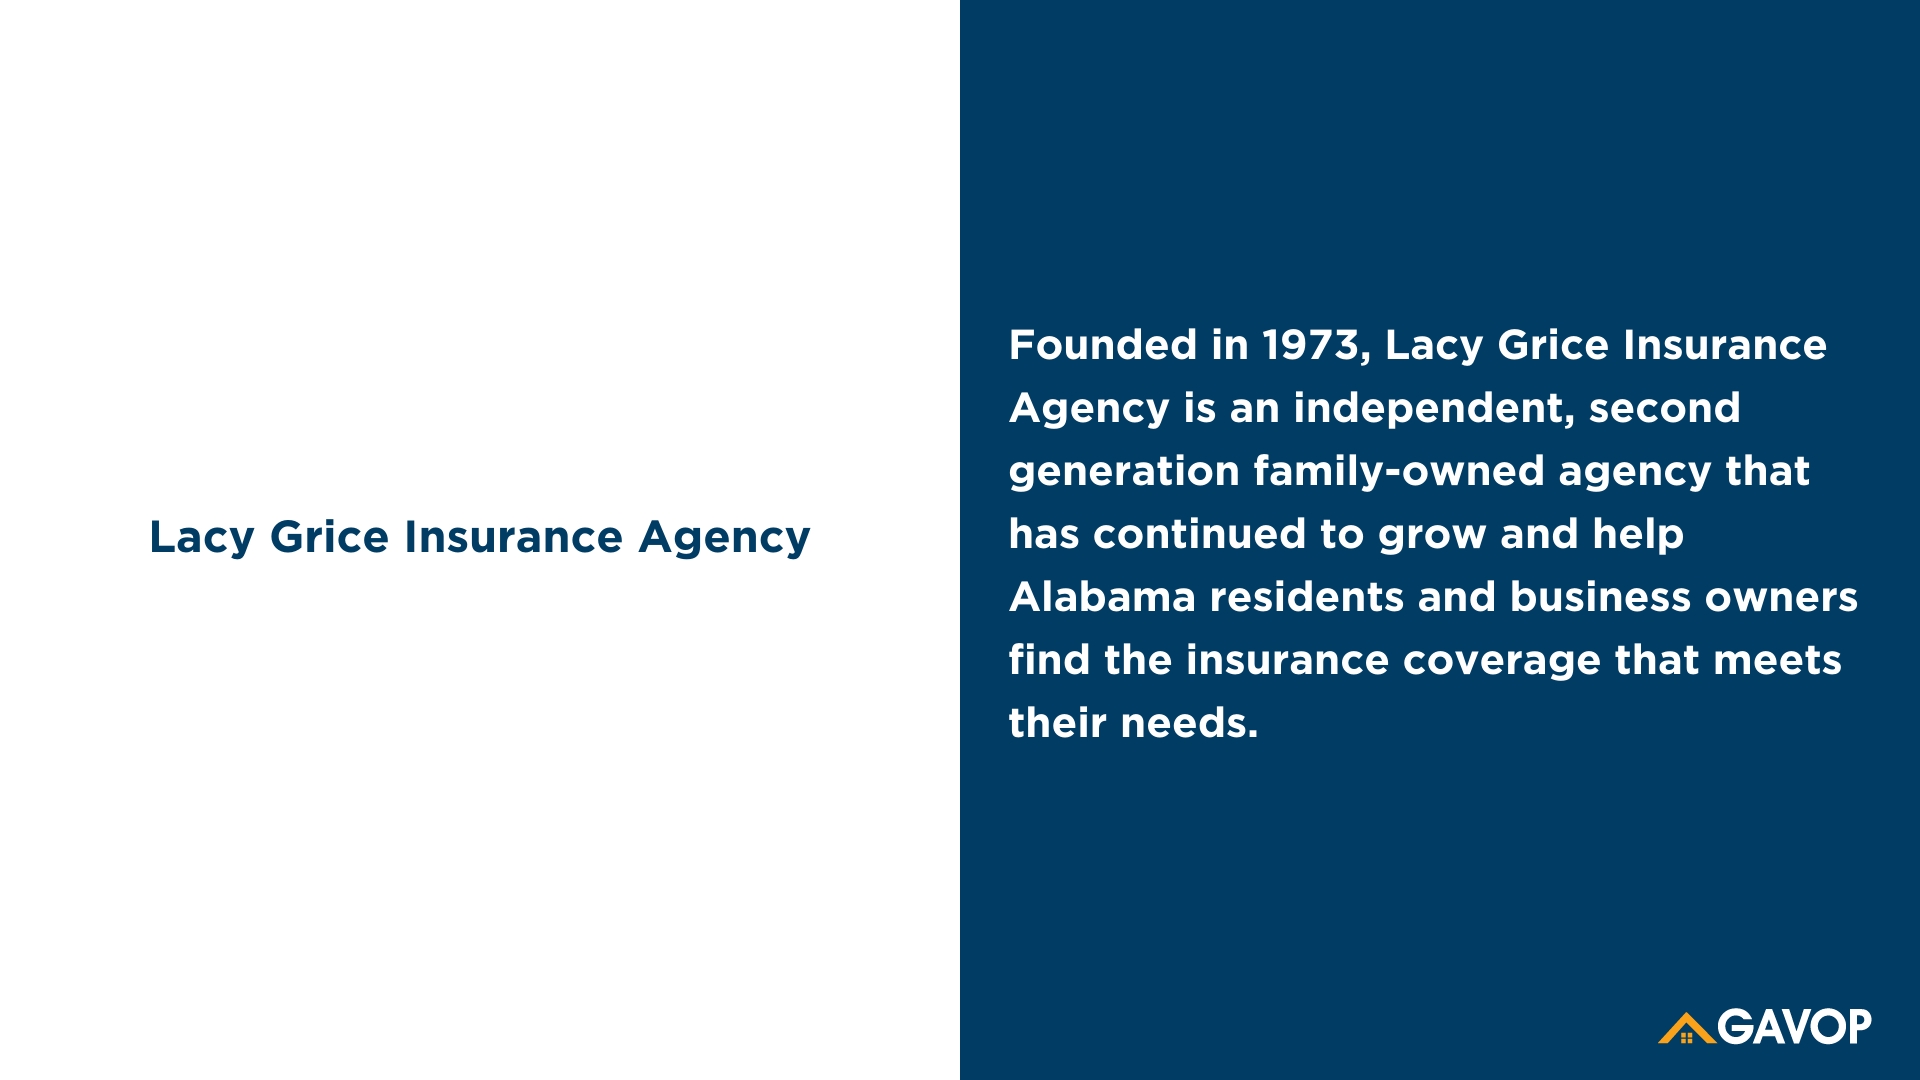 Lacy Grice Insurance Agency